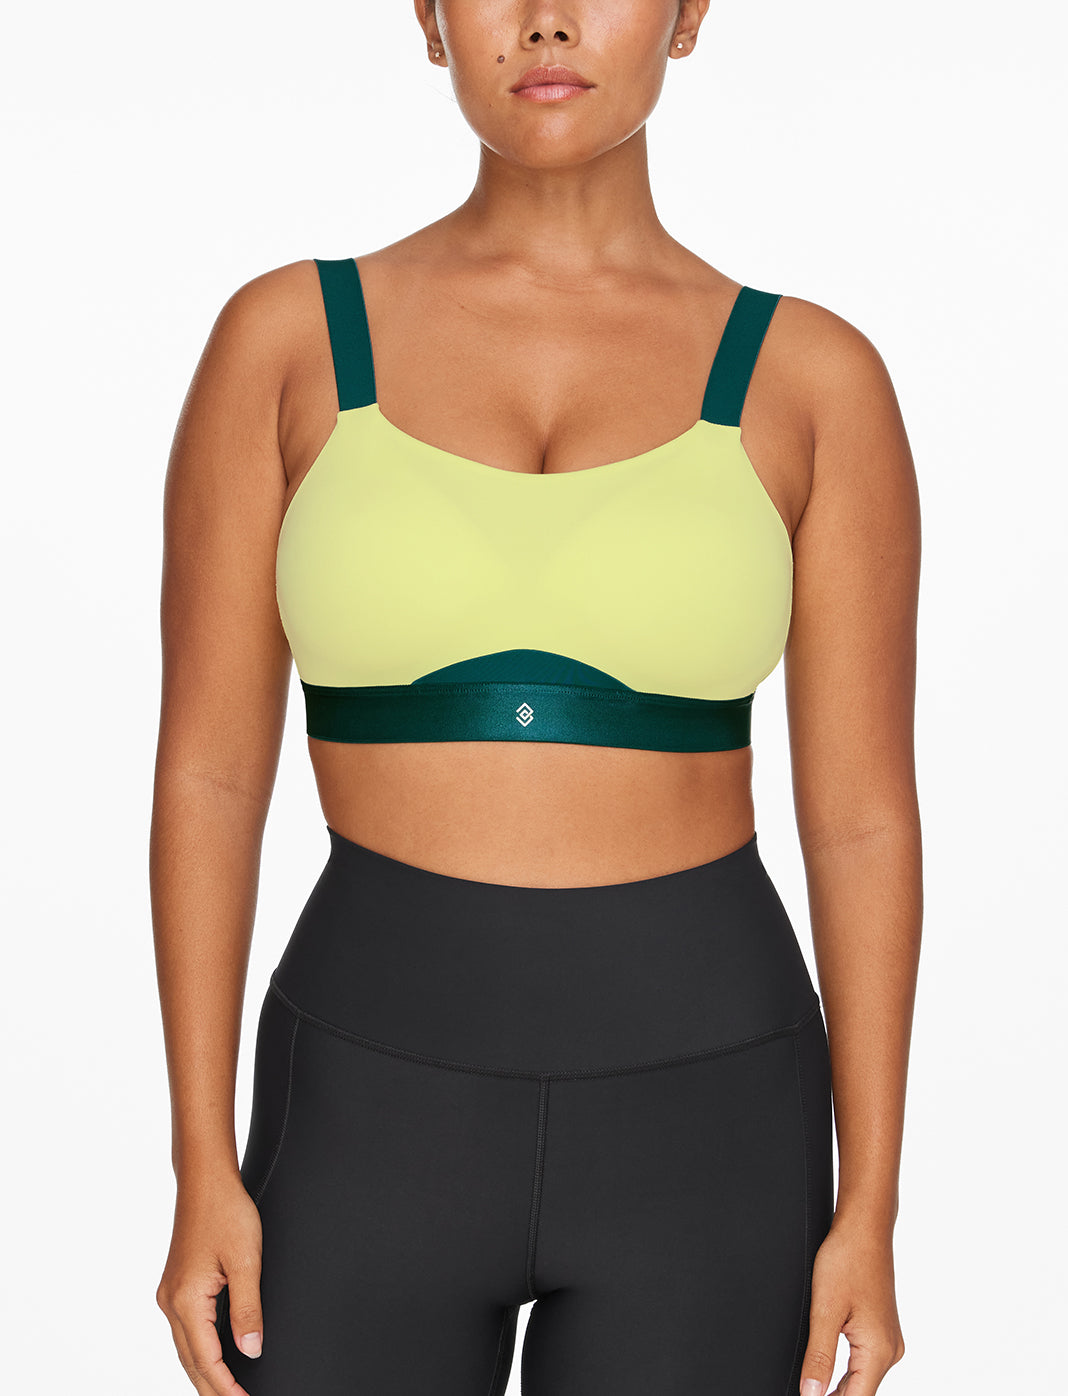 32G sports bras - 10 products